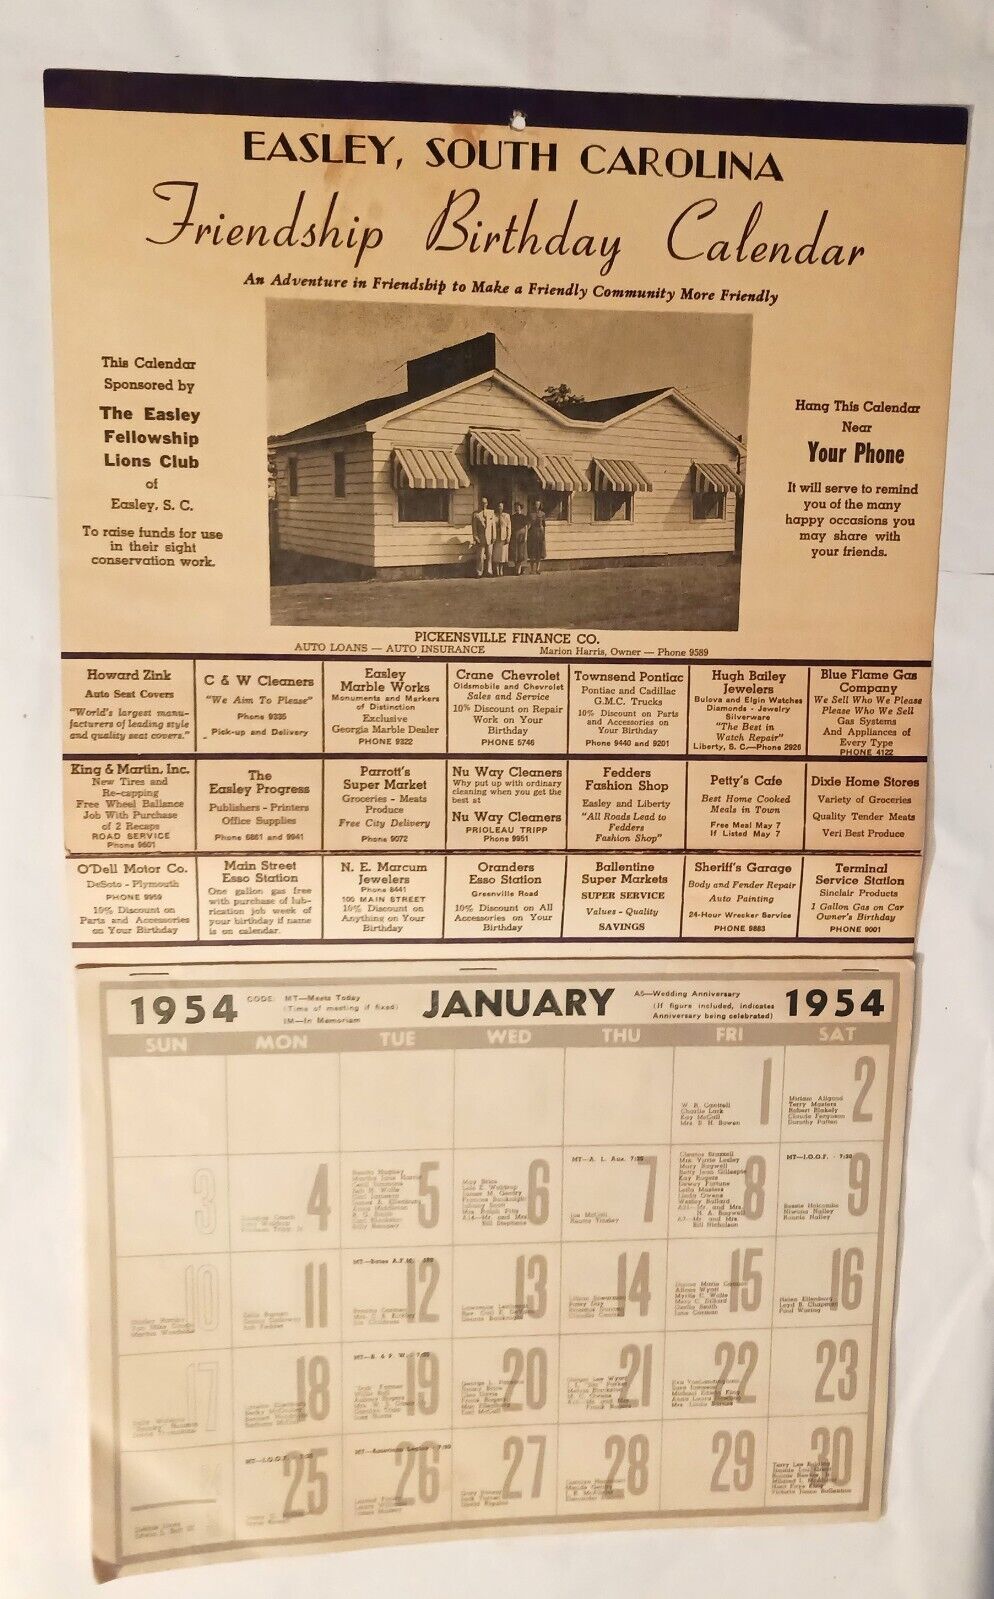 Easley South Carolina 1954 Friendship Birthday Calendar All 12 Months with Names